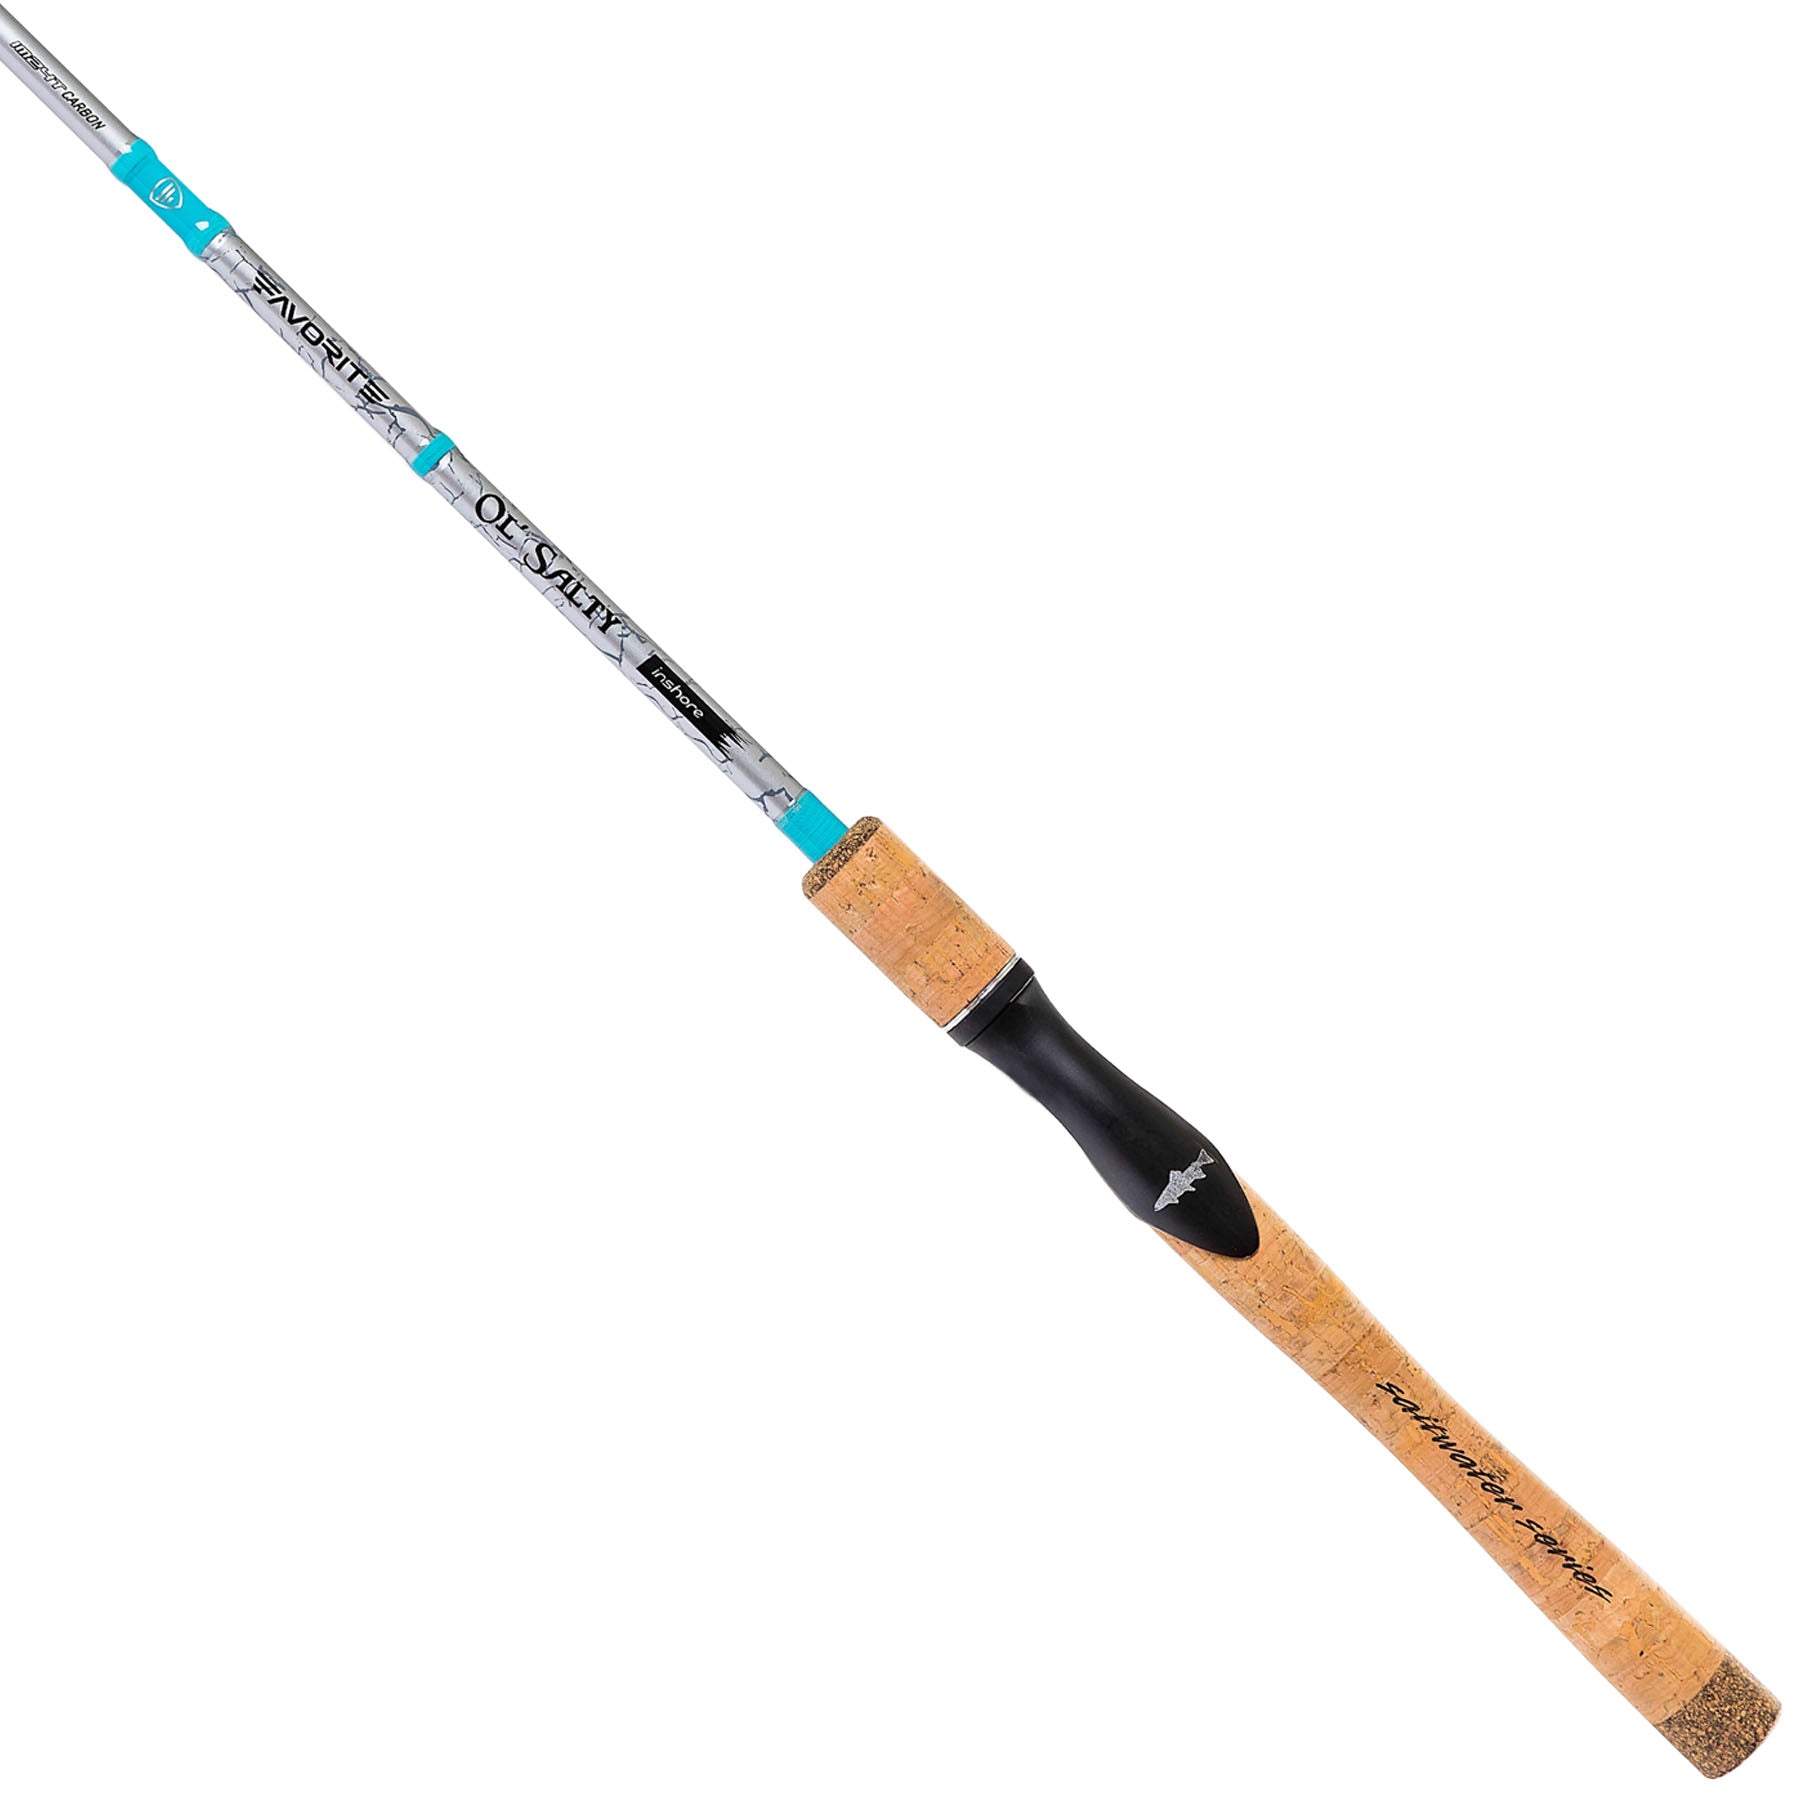 OL' Salty Spinning Combo Favorite Fishing, 40% OFF